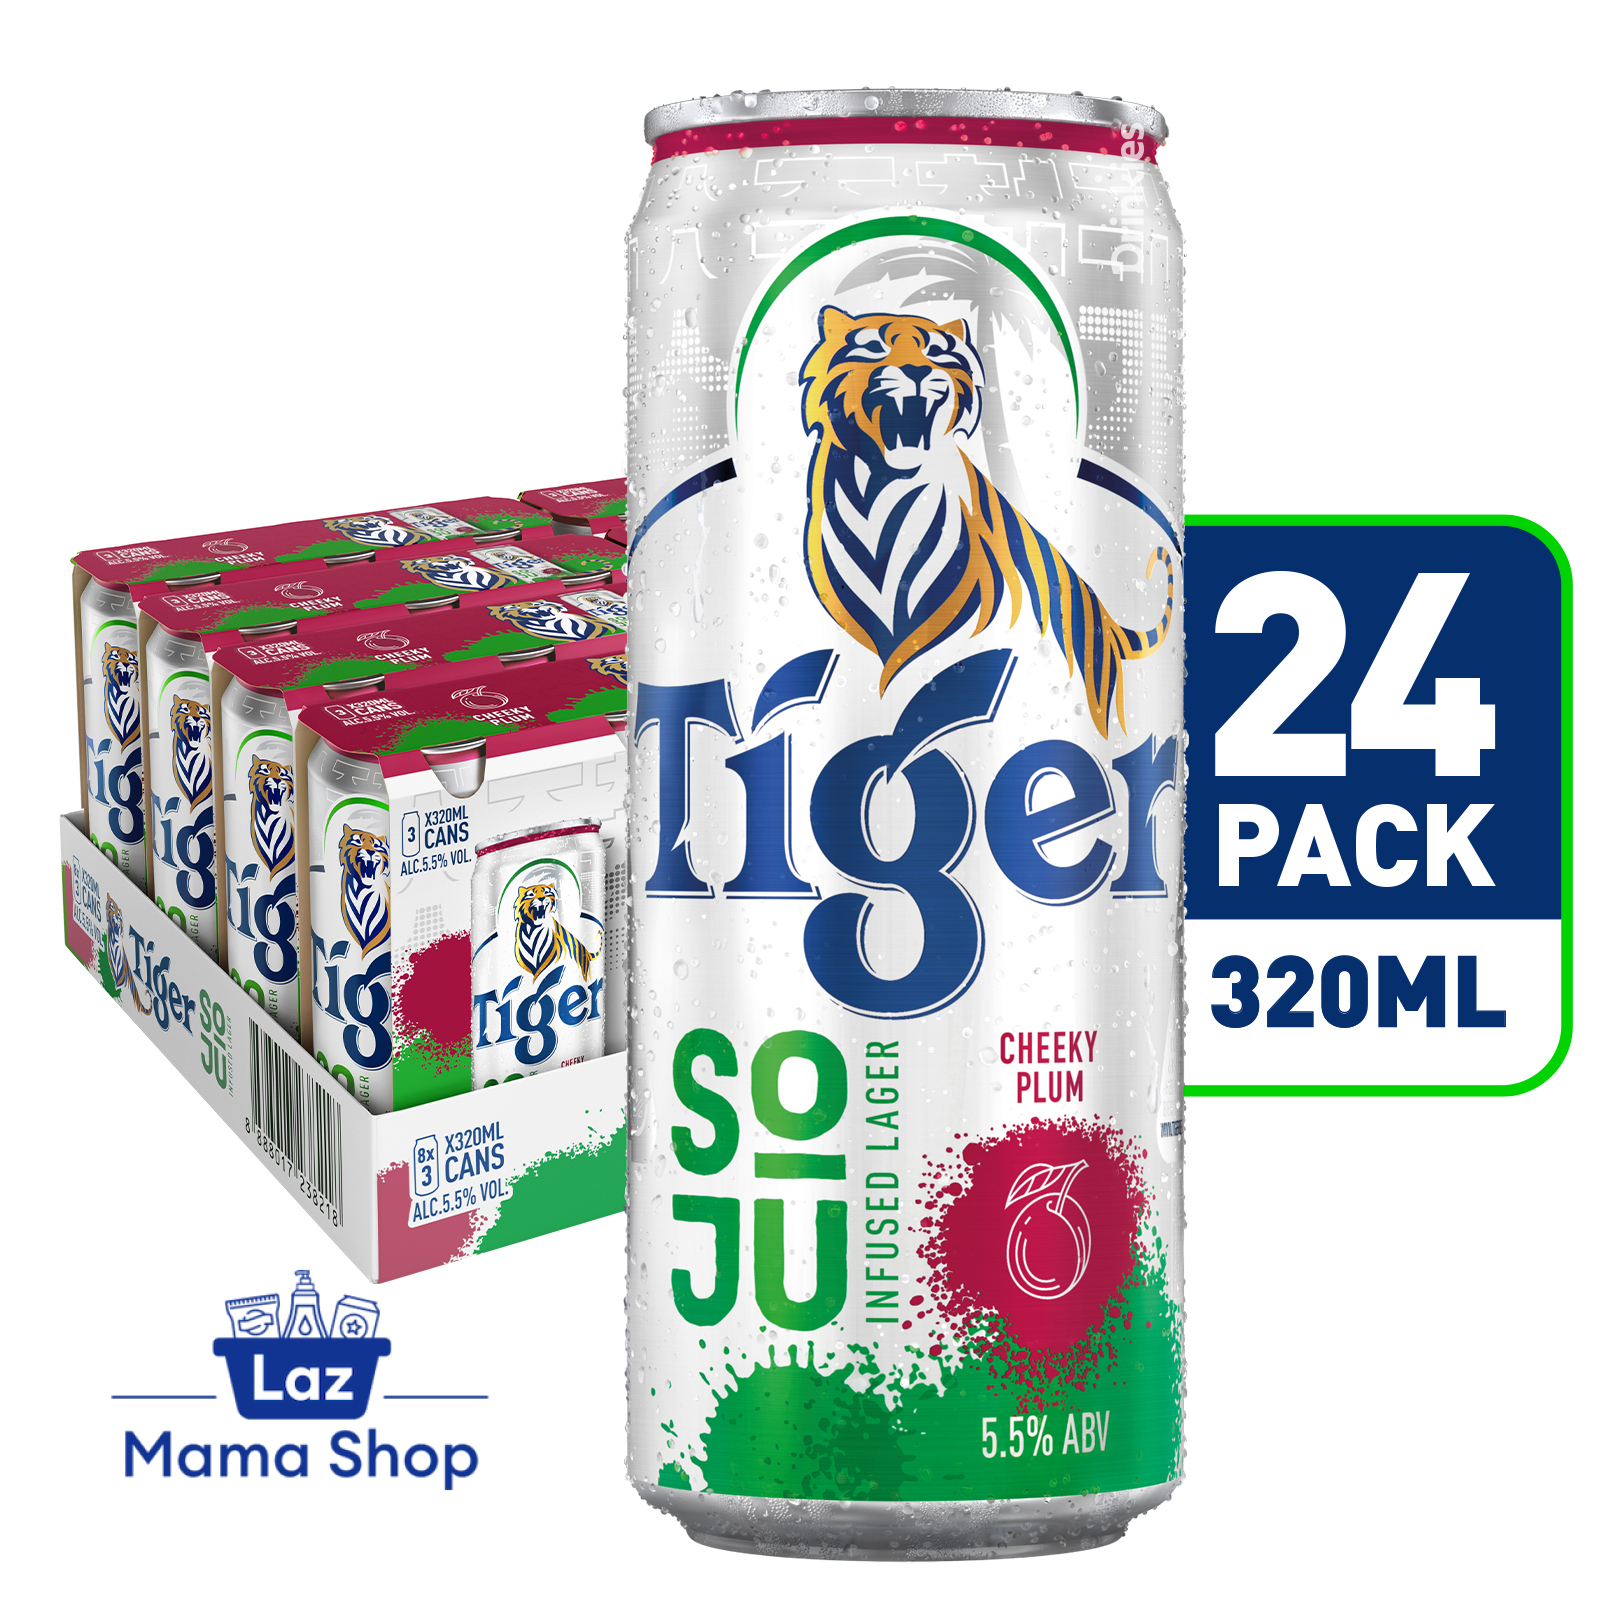 Tiger Soju Infused Lager Cheeky Plum Can - 24 x 320ML